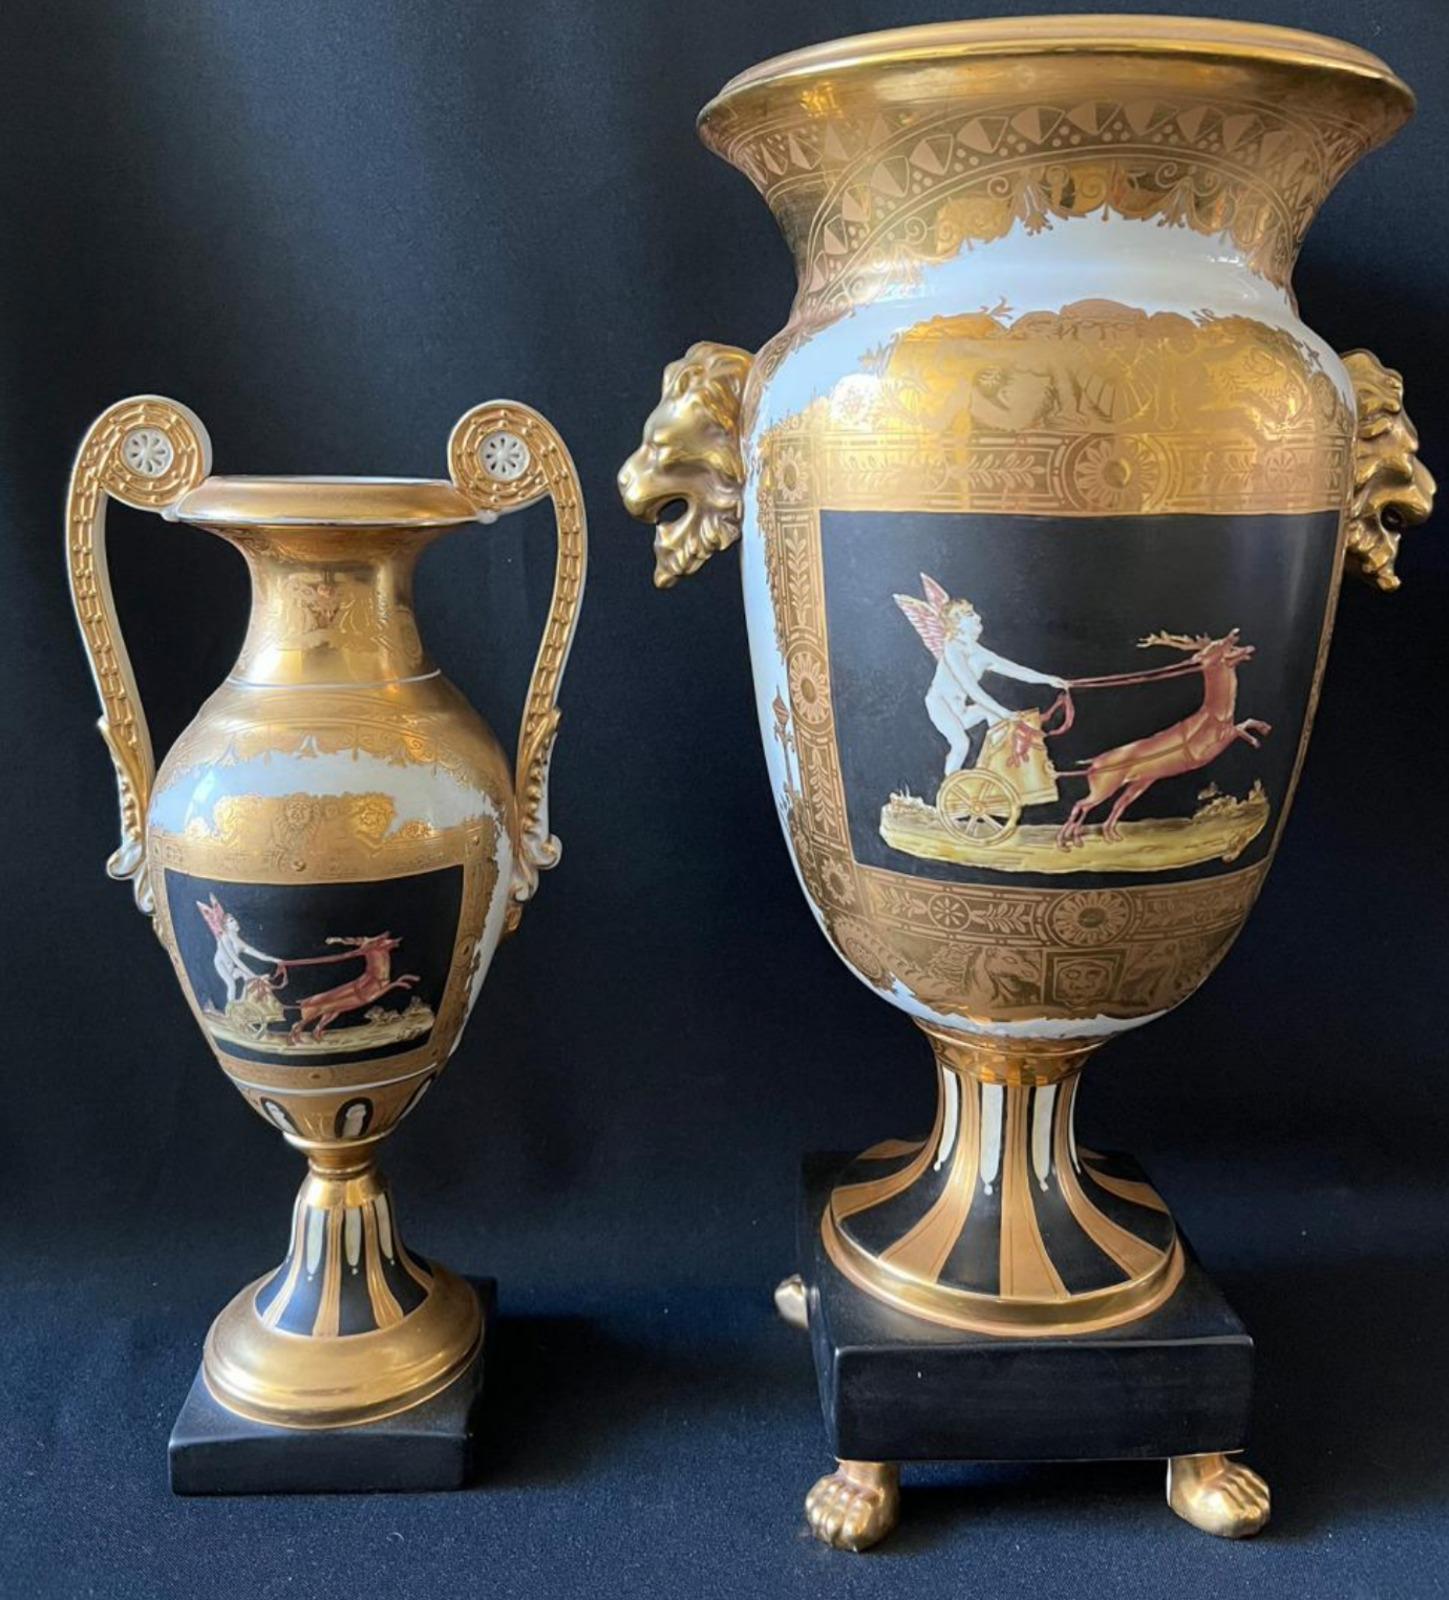 Pair of two magnificent vases in the shape of Greek Amphorae French Empire 19th century.

The large one on paw feet and with lion handles, the small one on a square stand with volute handles.
Porcelain, gilded and decorated with paintings, marked